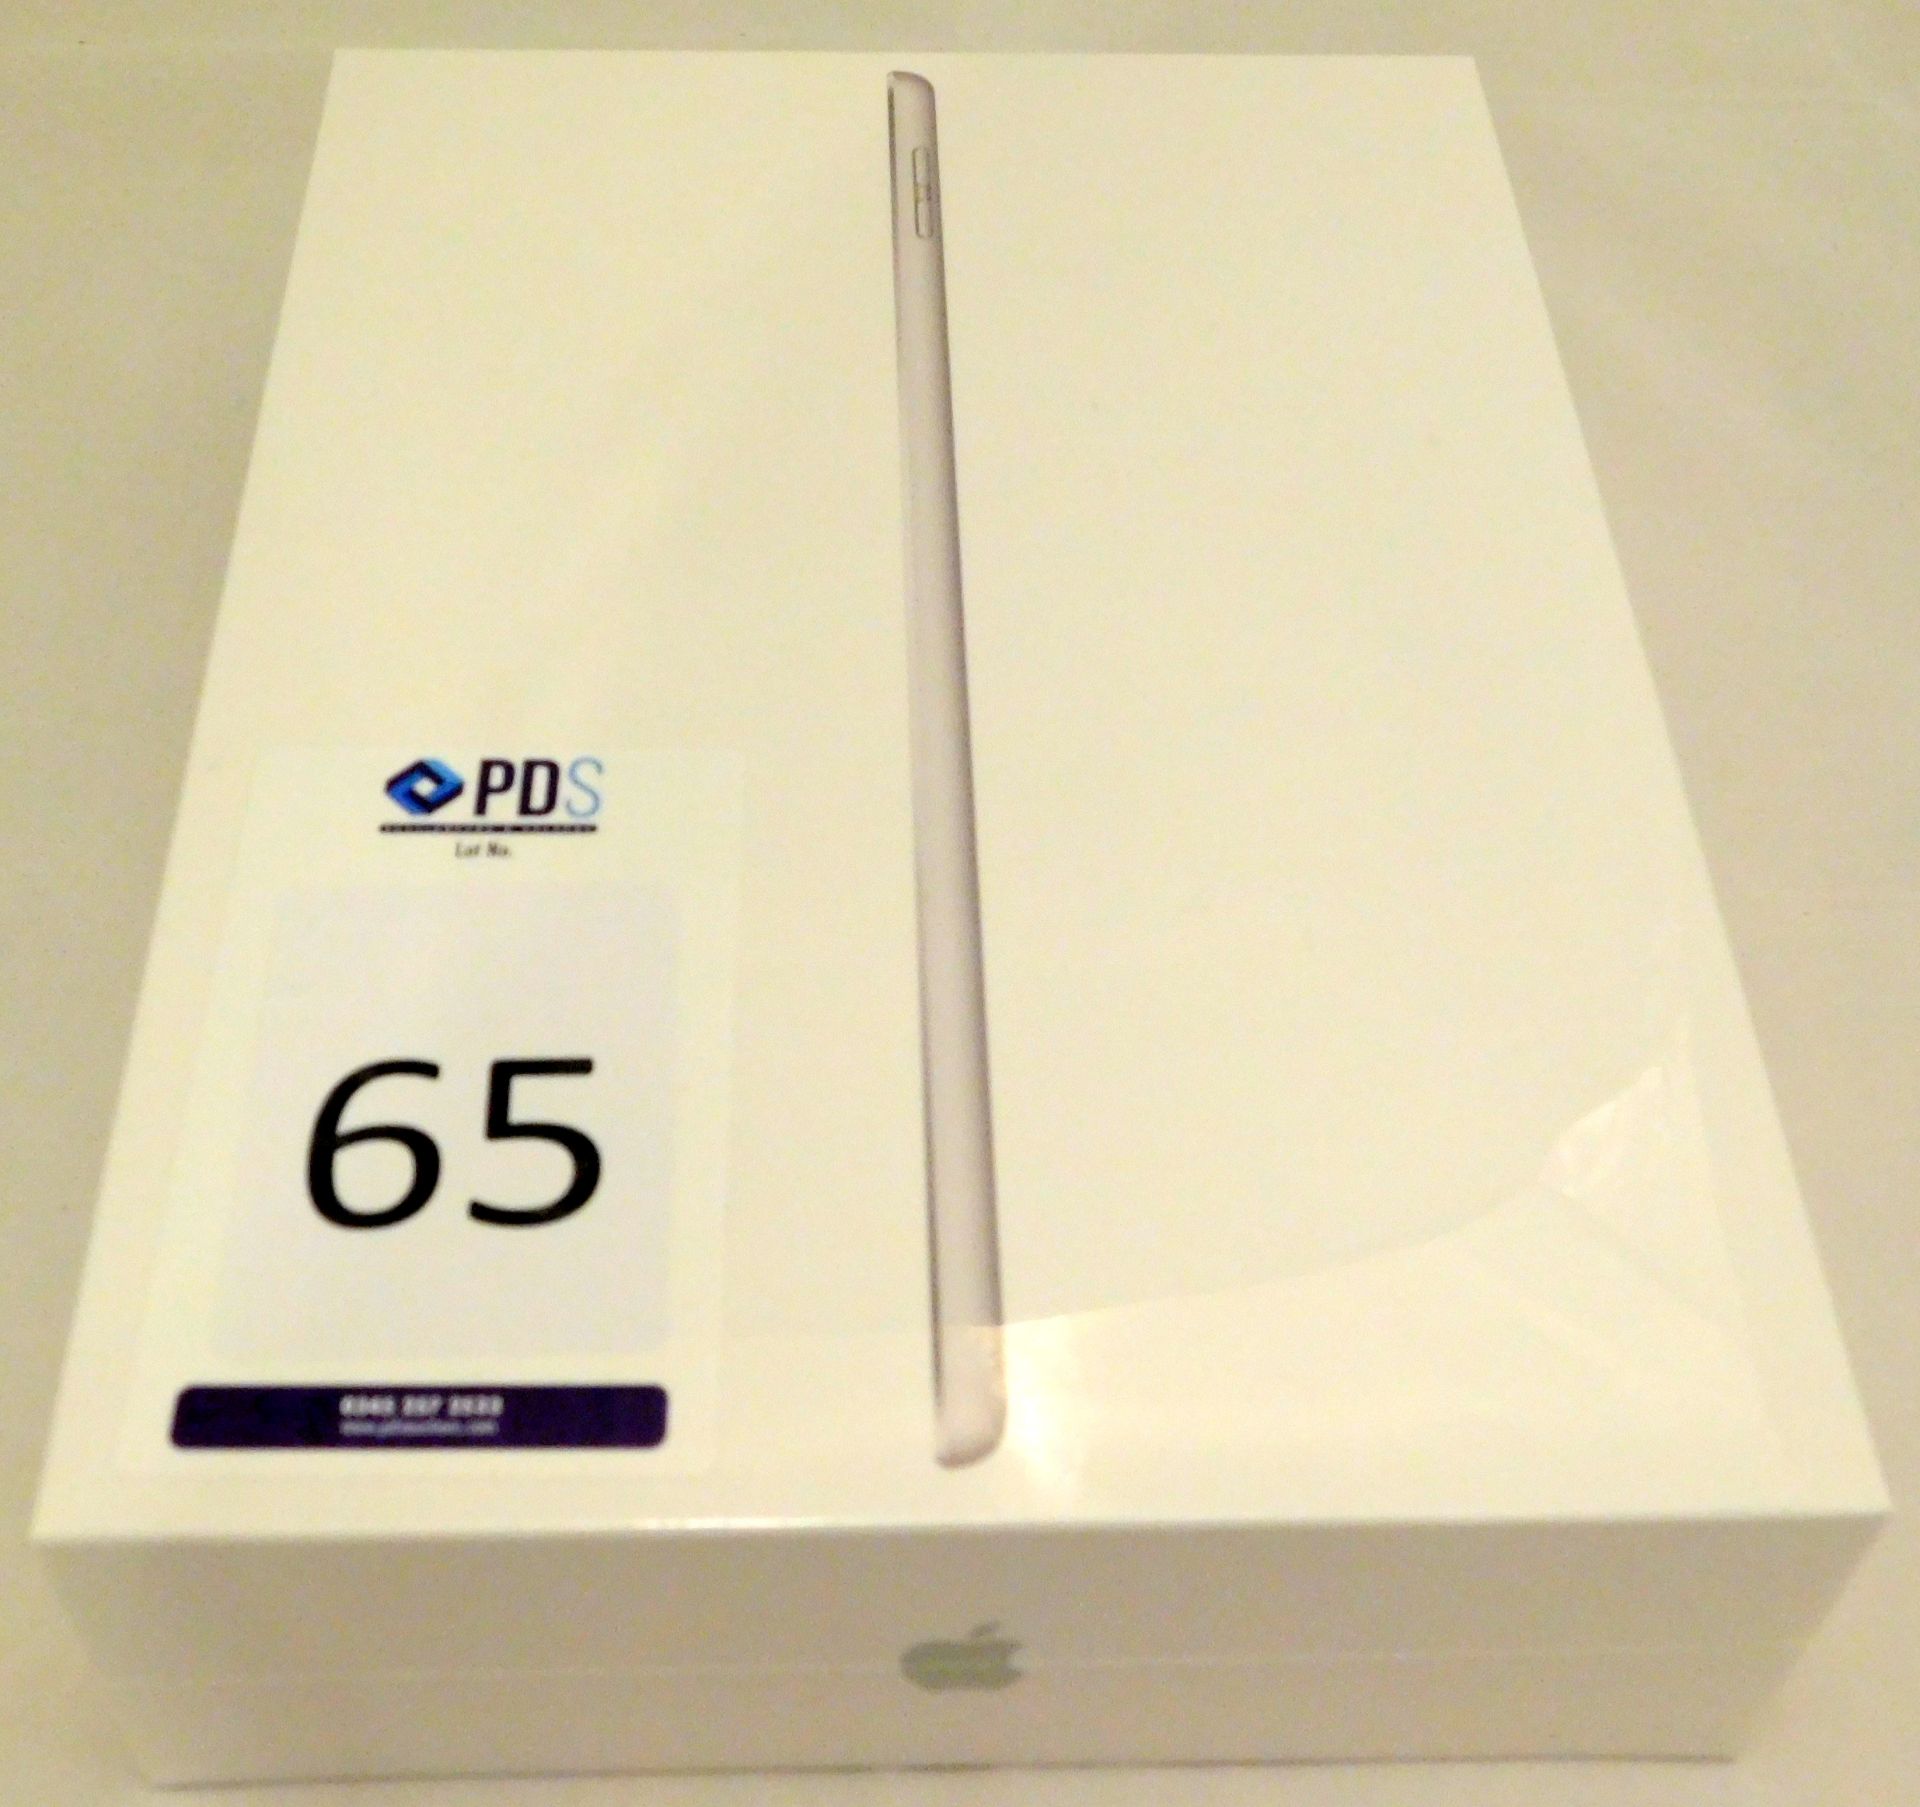 Apple A2197 iPad, 7th Gen, 32GB, Silver, Serial Number: DMPC80UGMF3N, (New in Sealed Box) (Located